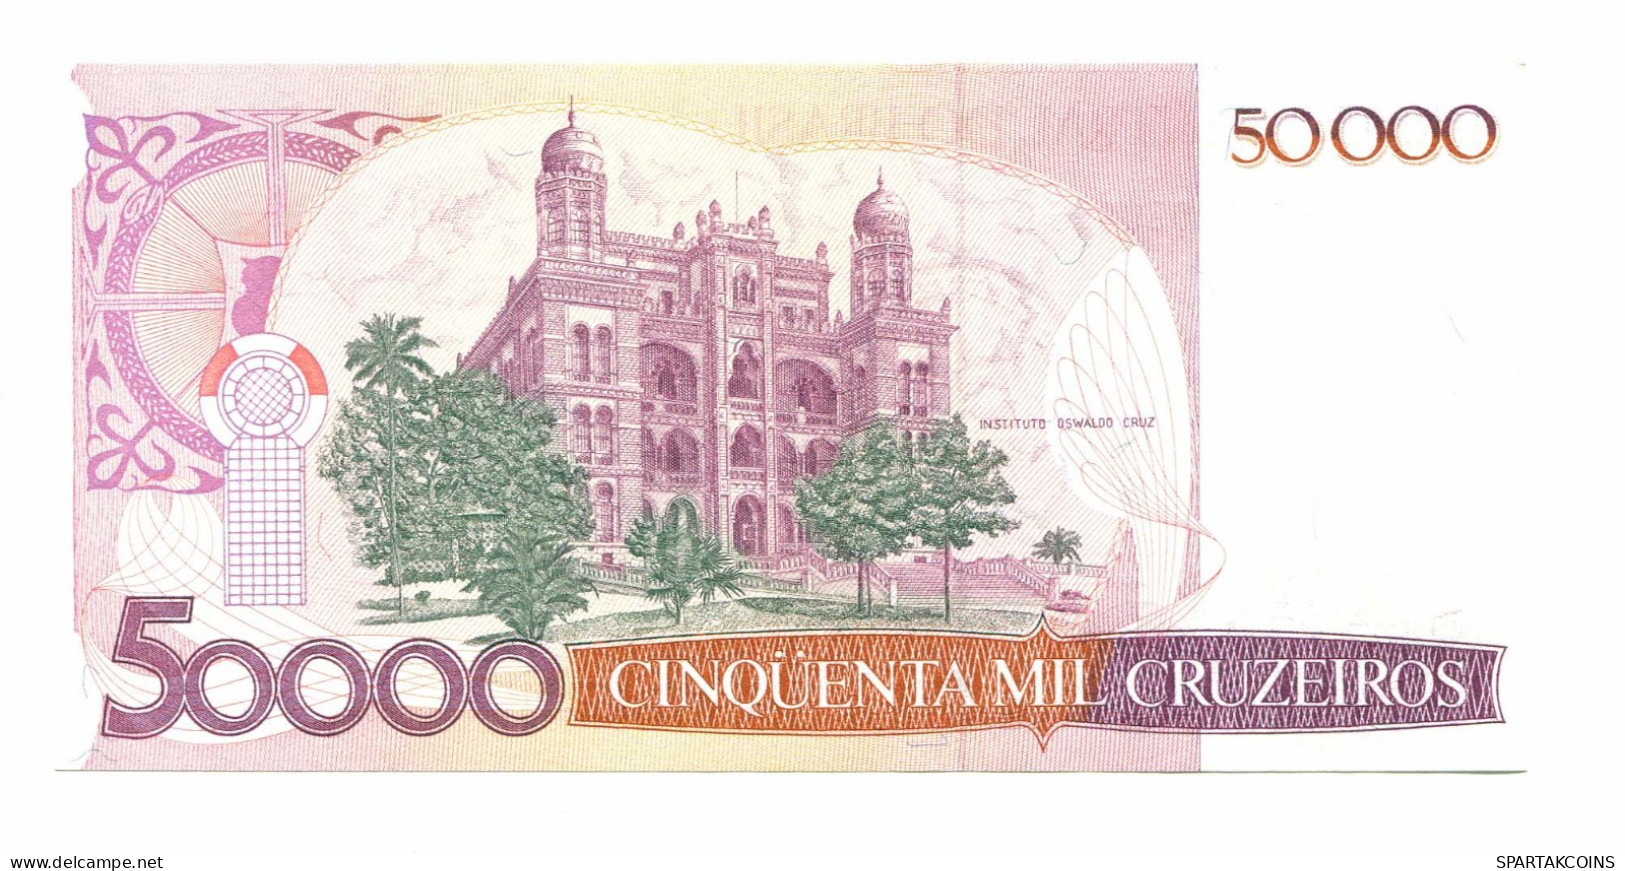 BRAZIL REPLACEMENT NOTE Star*A 50 CRUZADOS ON 50000 CRUZEIROS 1986 UNC P10999.6 - [11] Lokale Uitgaven